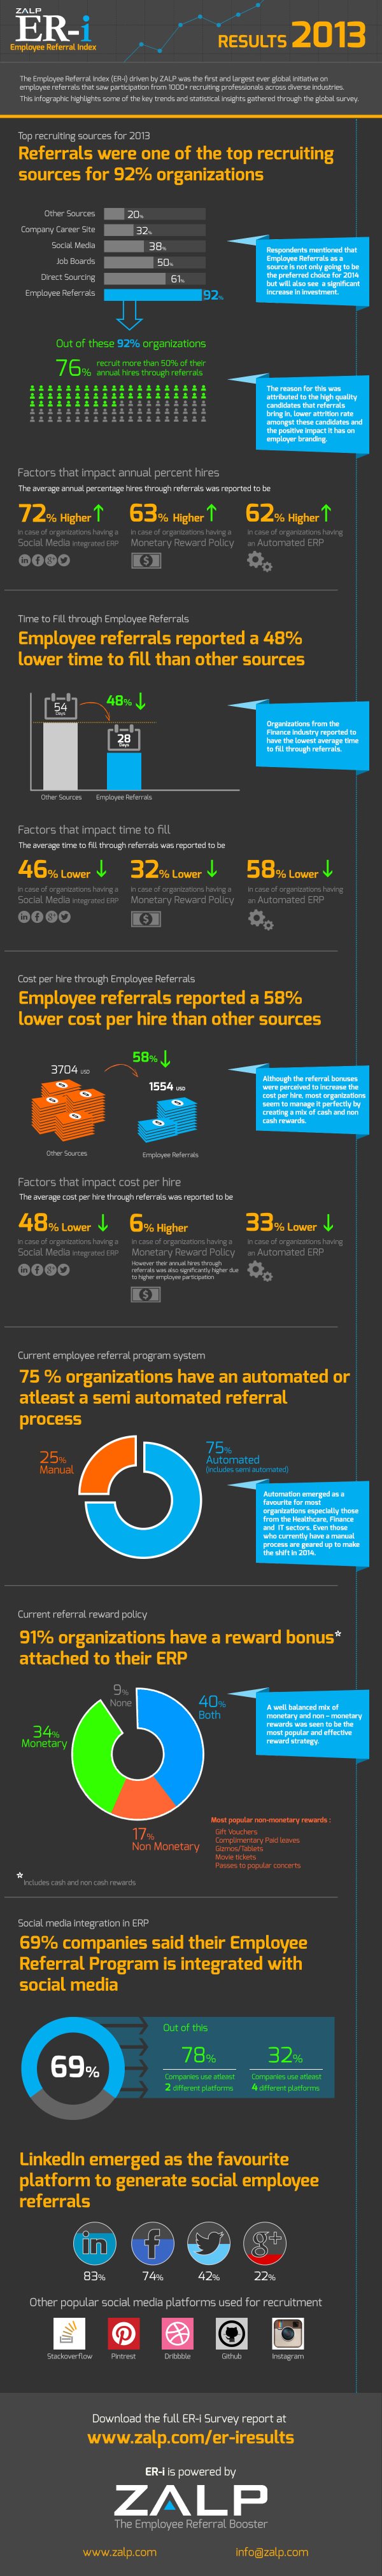 Employee Referral Index Report 2013 Infographic